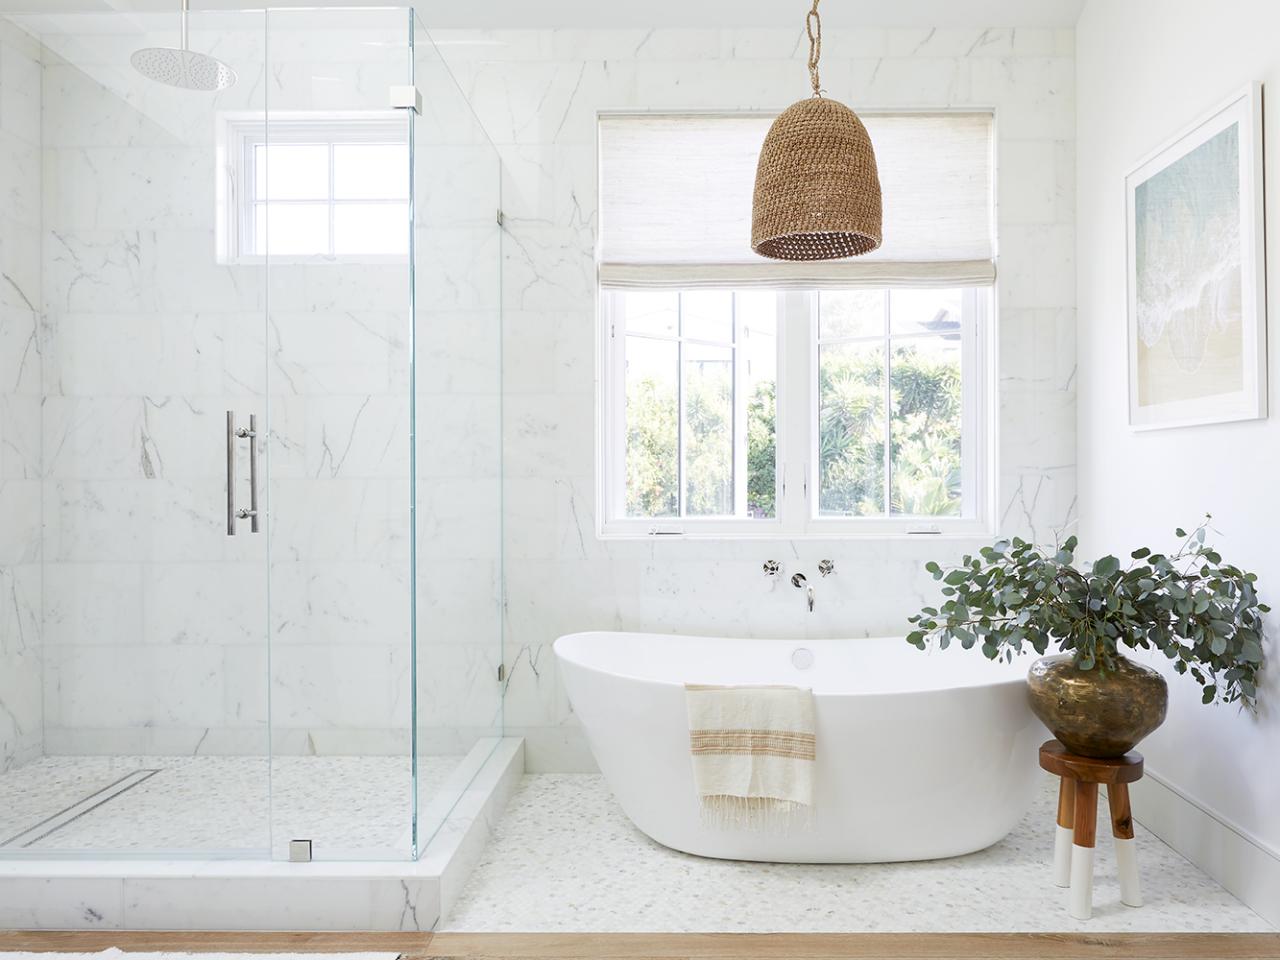 30 Gorgeous Bathroom Shower Ideas We're Swooning Over